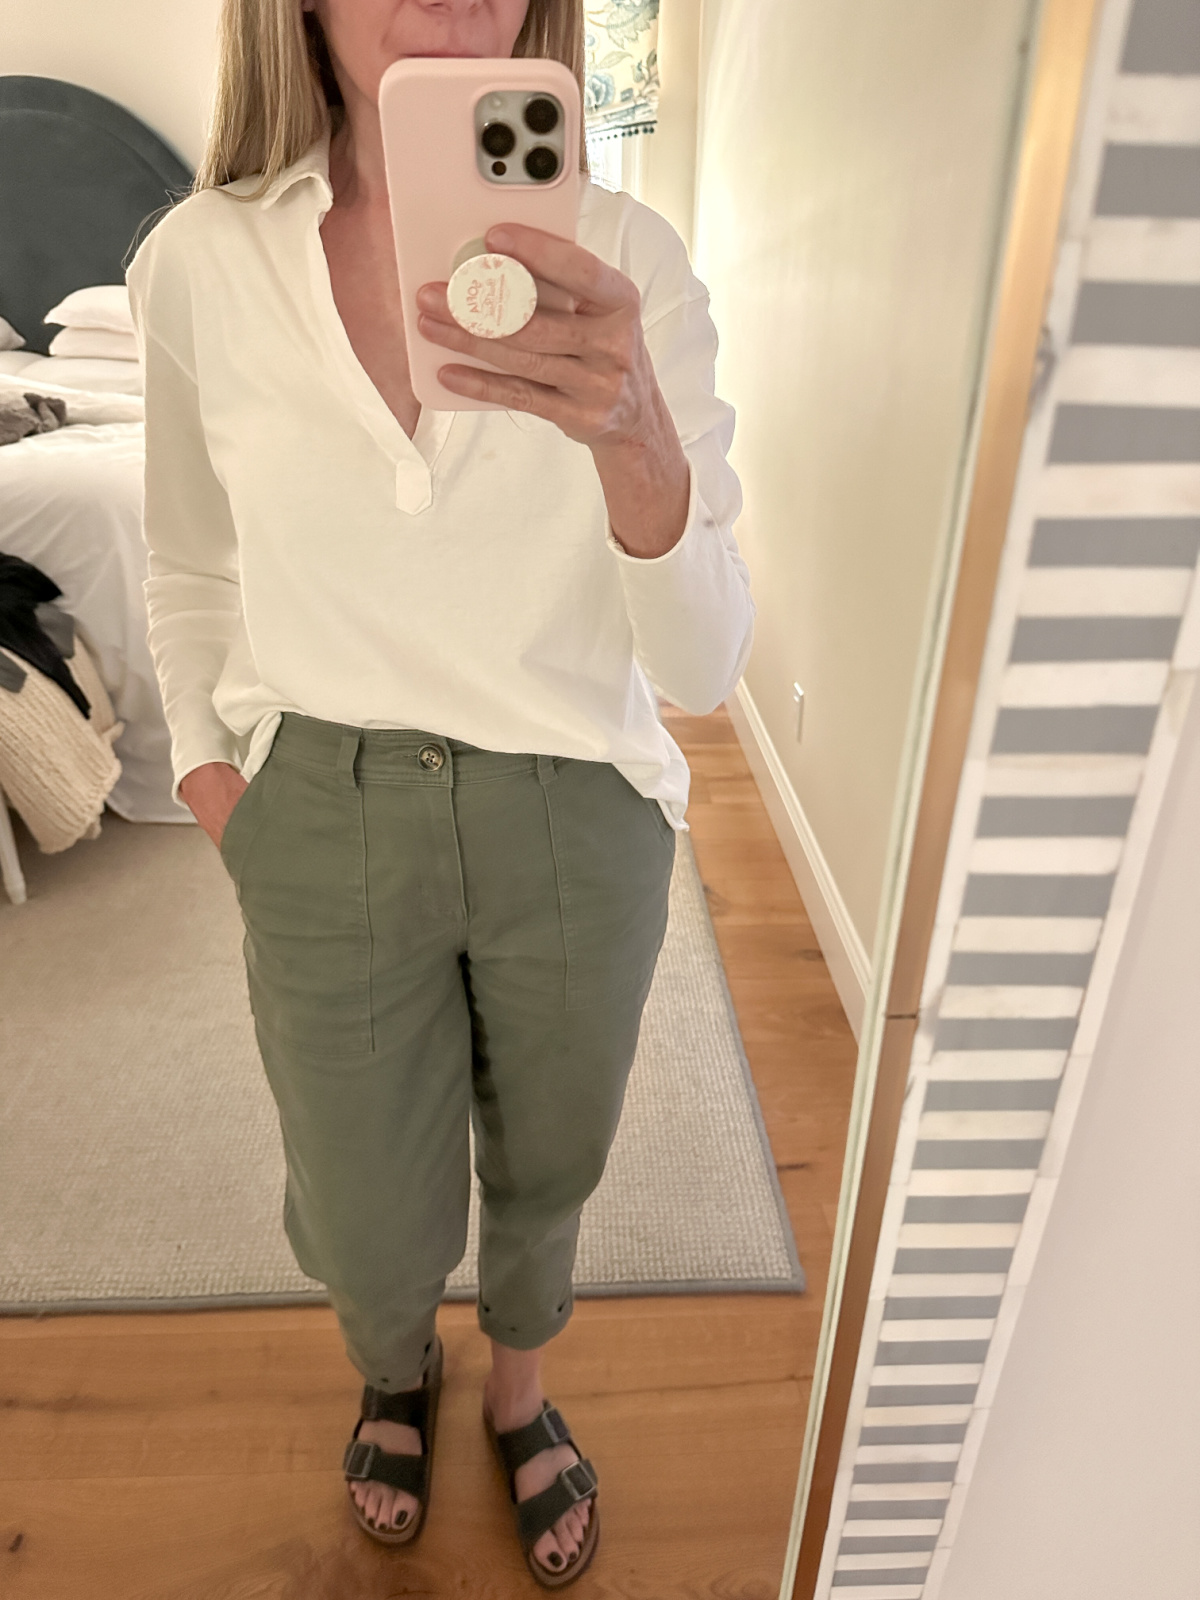 Woman wearing long sleeved white henley tee shirt and khaki green pants with Birkenstocks taking a mirror selfie.